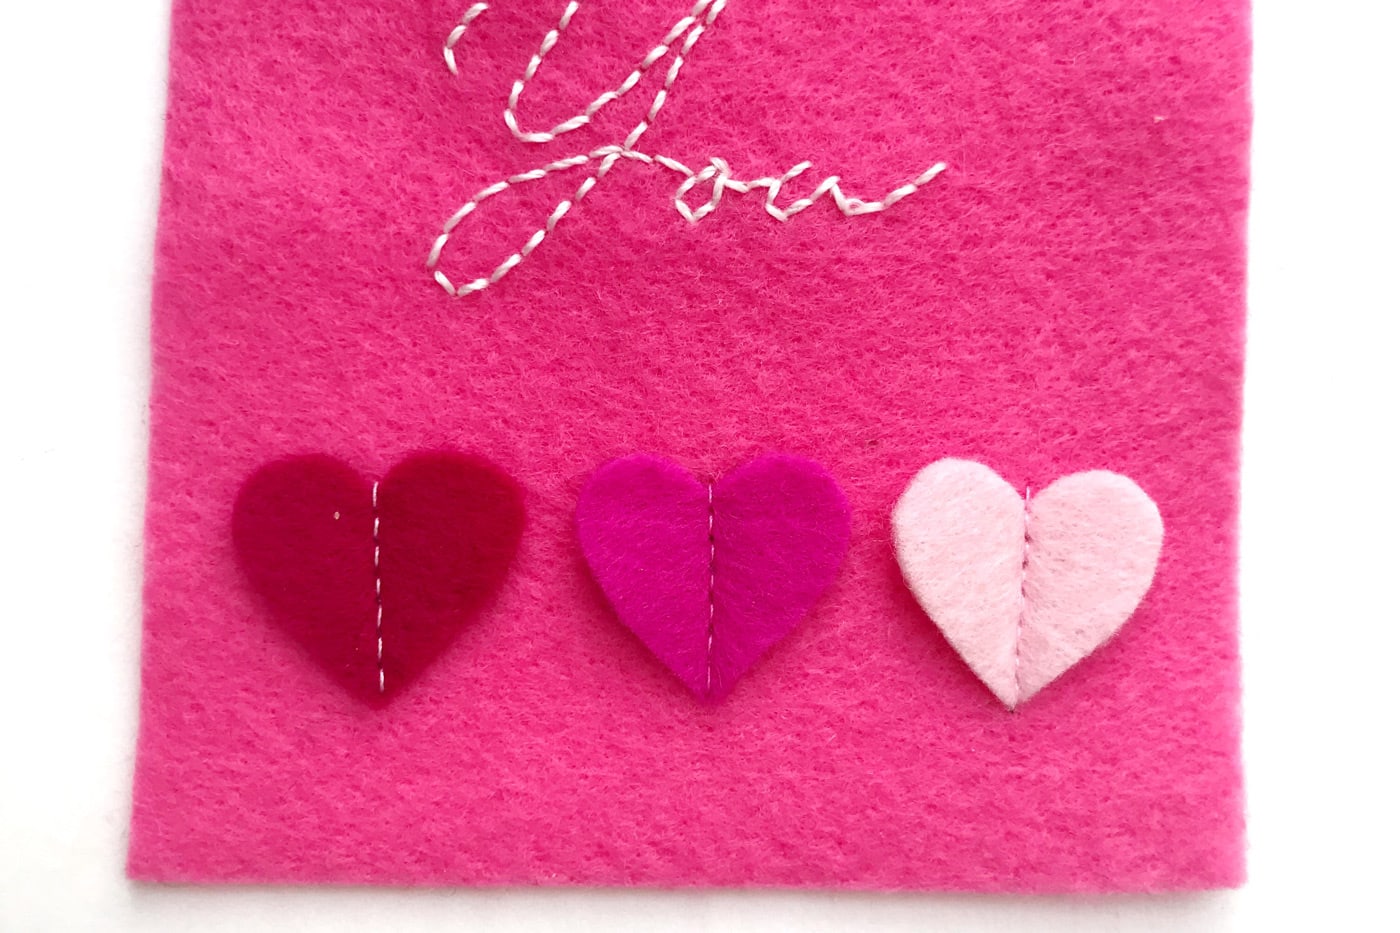 hand embroidered felt gift tags on white table showing detail of stitched down hearts